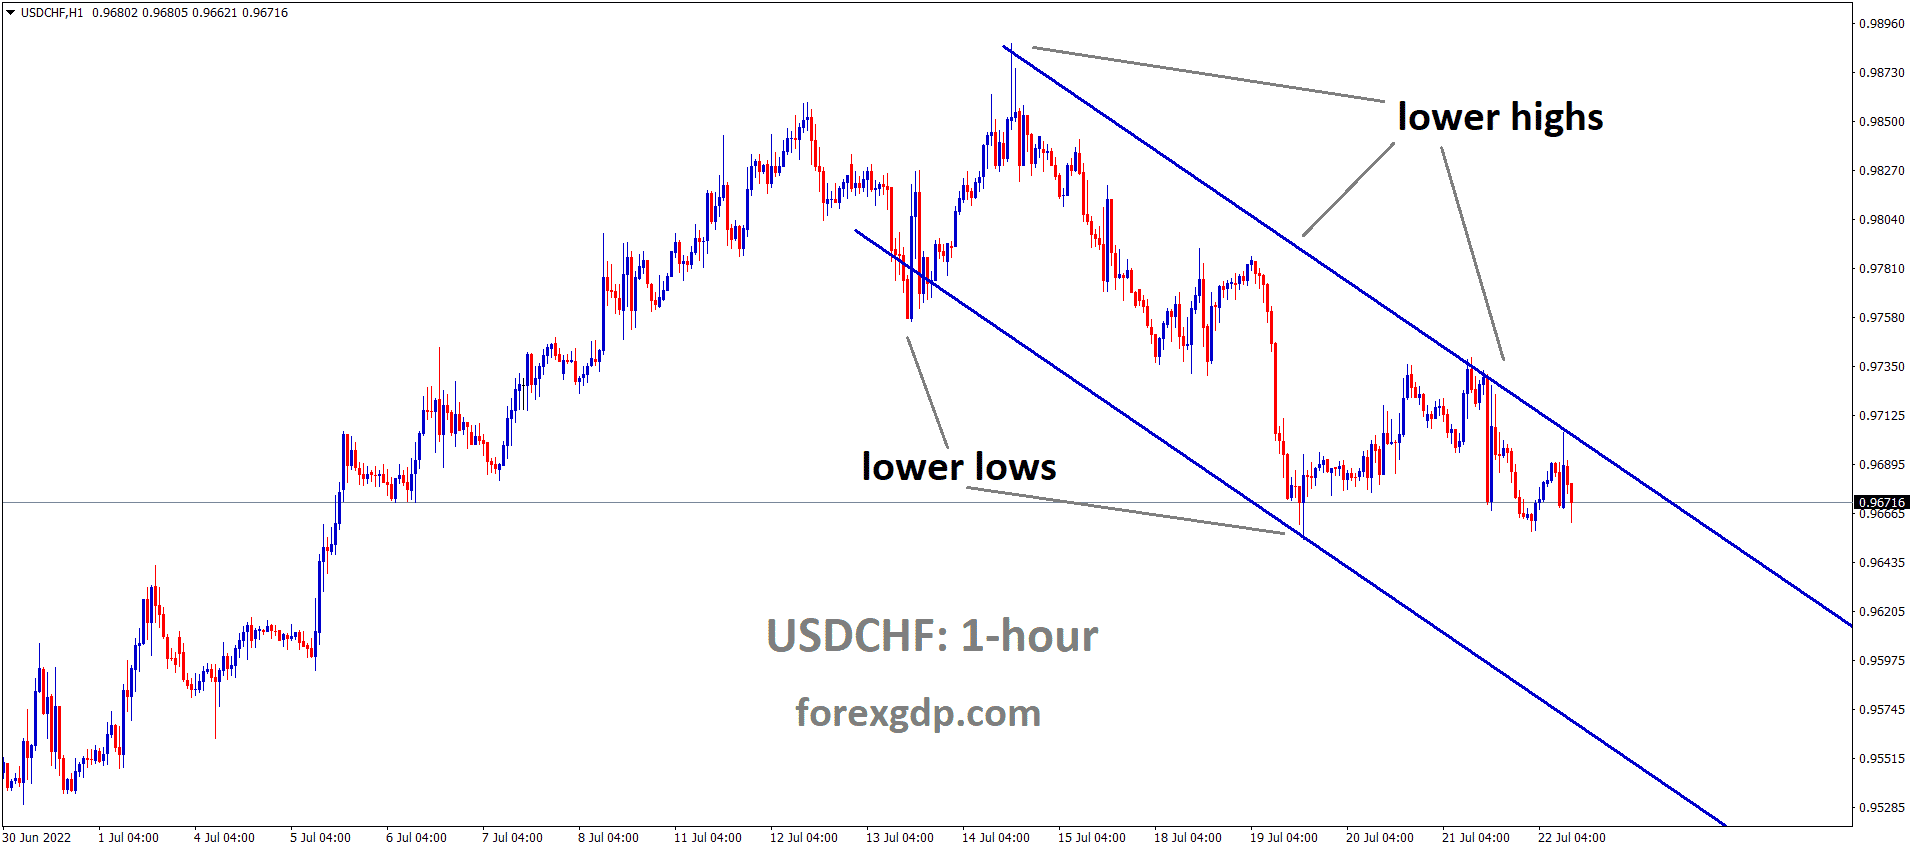 USDCHF is moving in the Descending channel and the market has fallen from the Lower high area of the channel